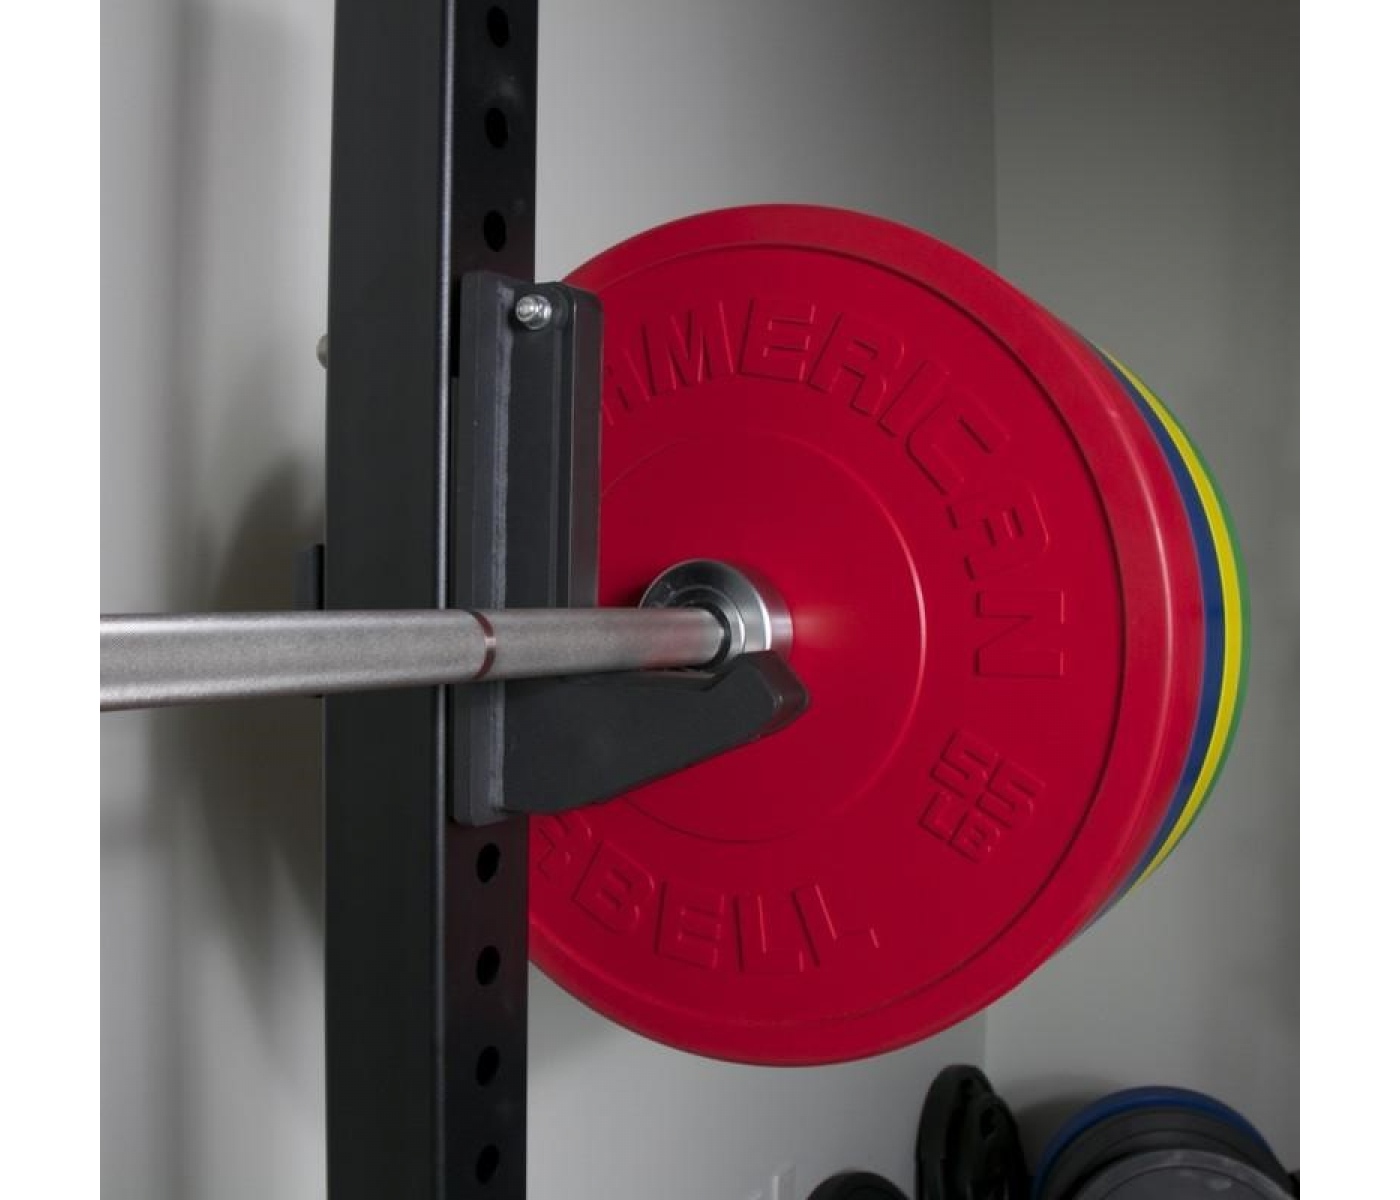 American Barbell Squat Stand